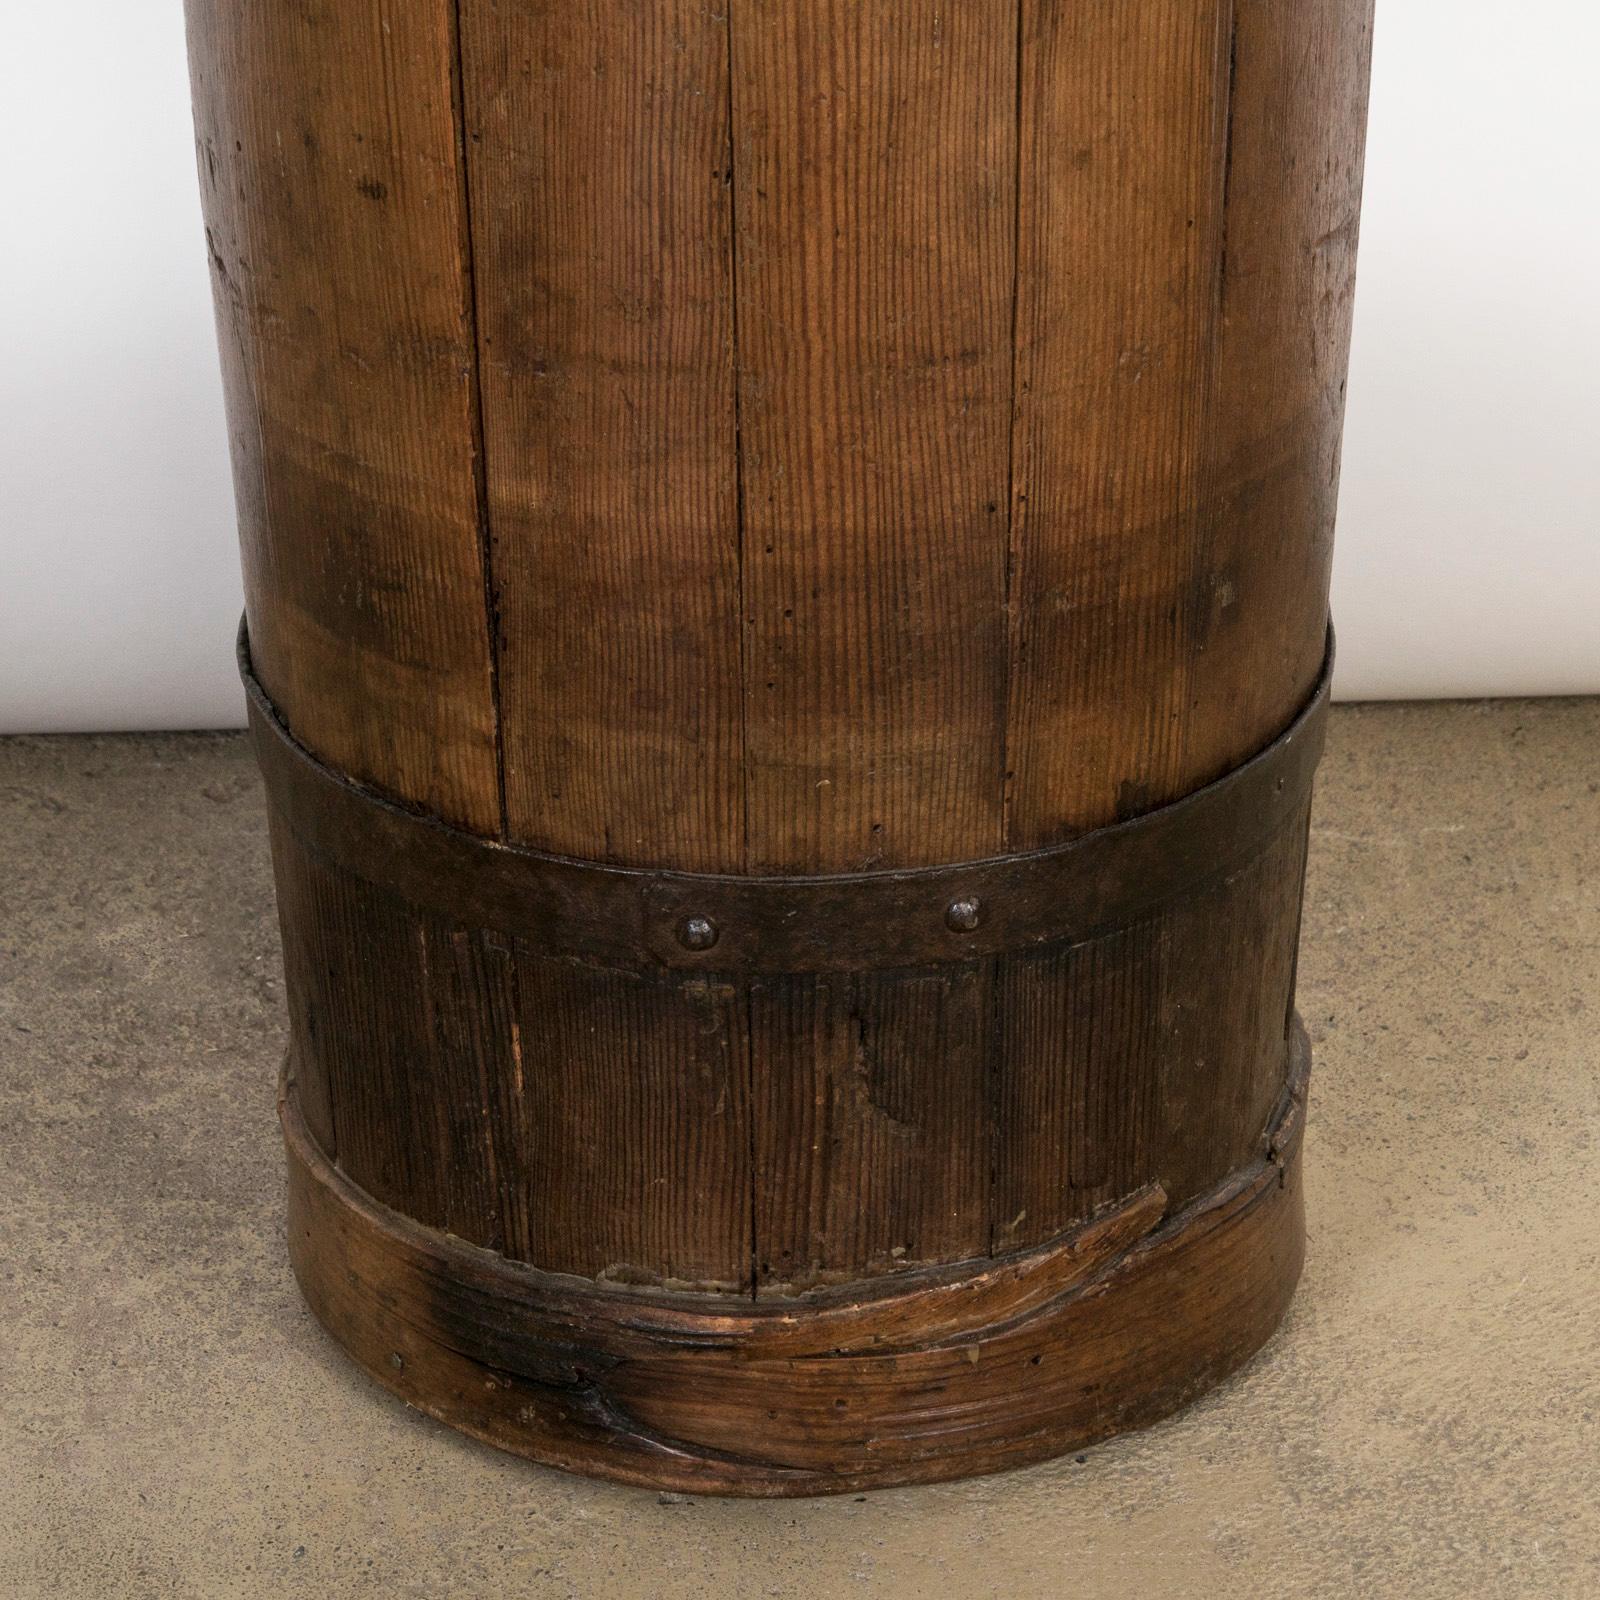 Hand-Crafted Rustic French Country Style Wooden Umbrella Or Cane Stand, Early 20th C For Sale